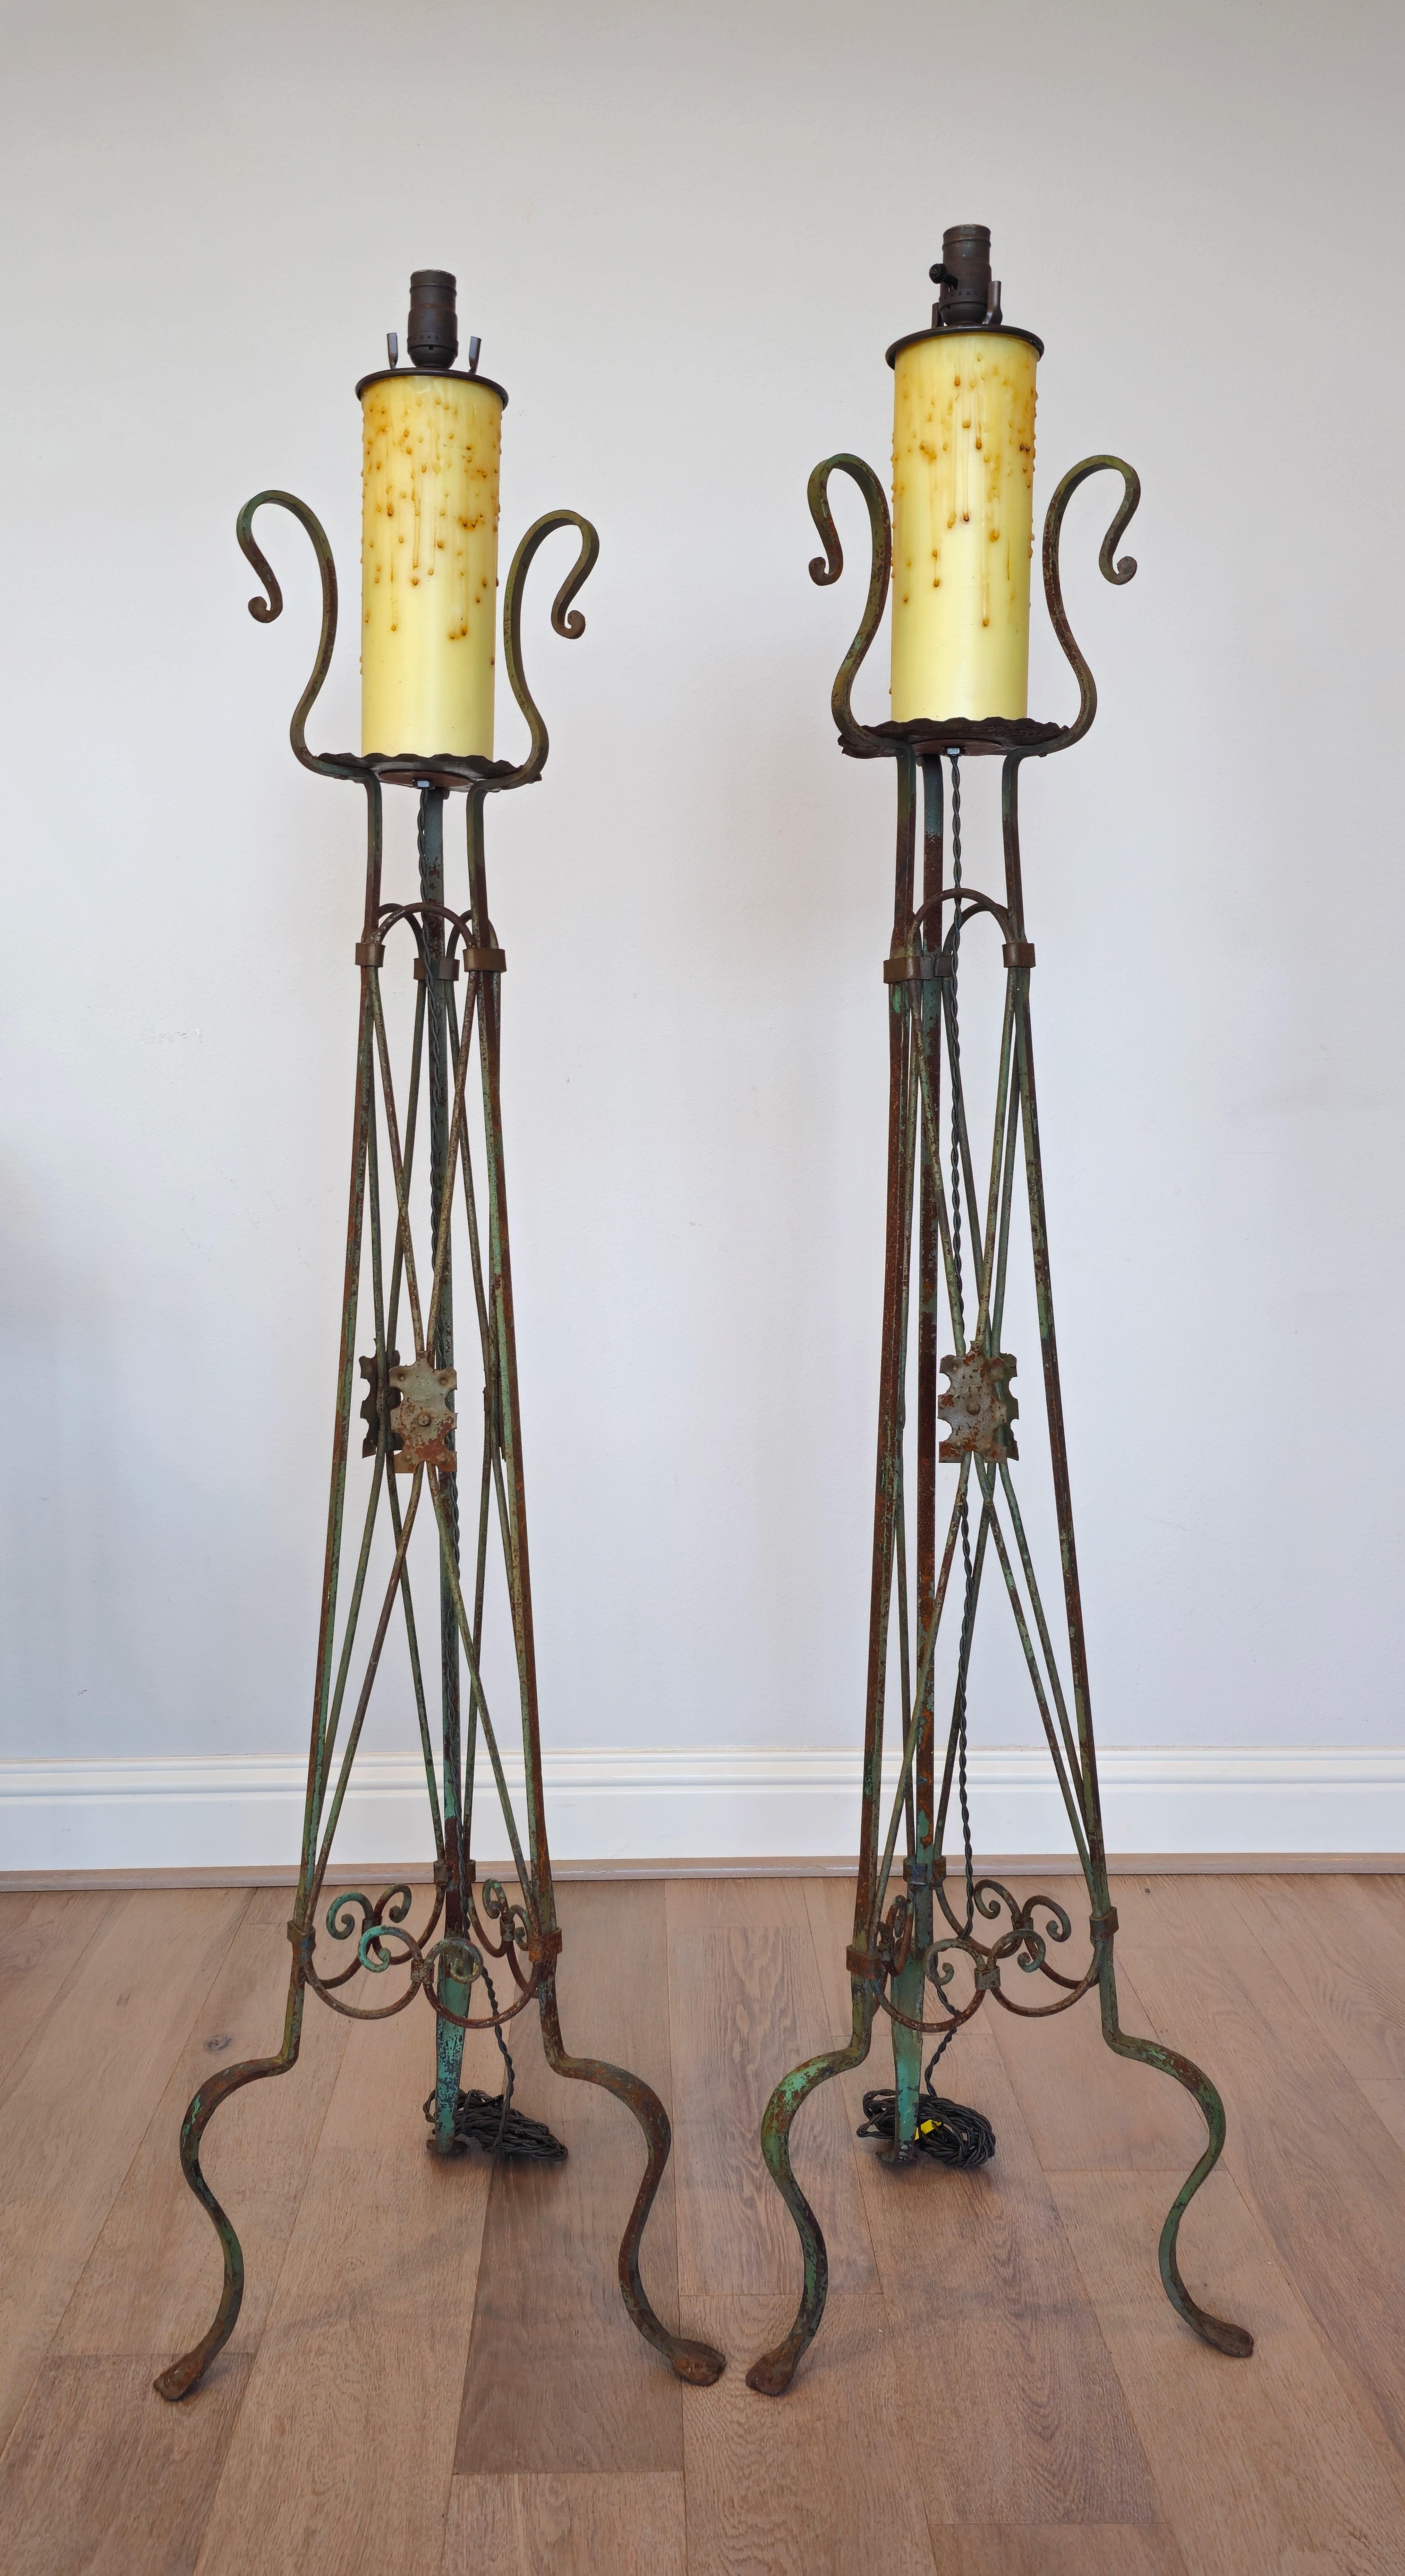 A magnificent pair of antique Athenian Neoclassical style scrolled iron faux candlestick torchères - floor standing lamps.

Each with single light mounted over large oversized faux candle, rising on heavily patinated distressed painted green iron